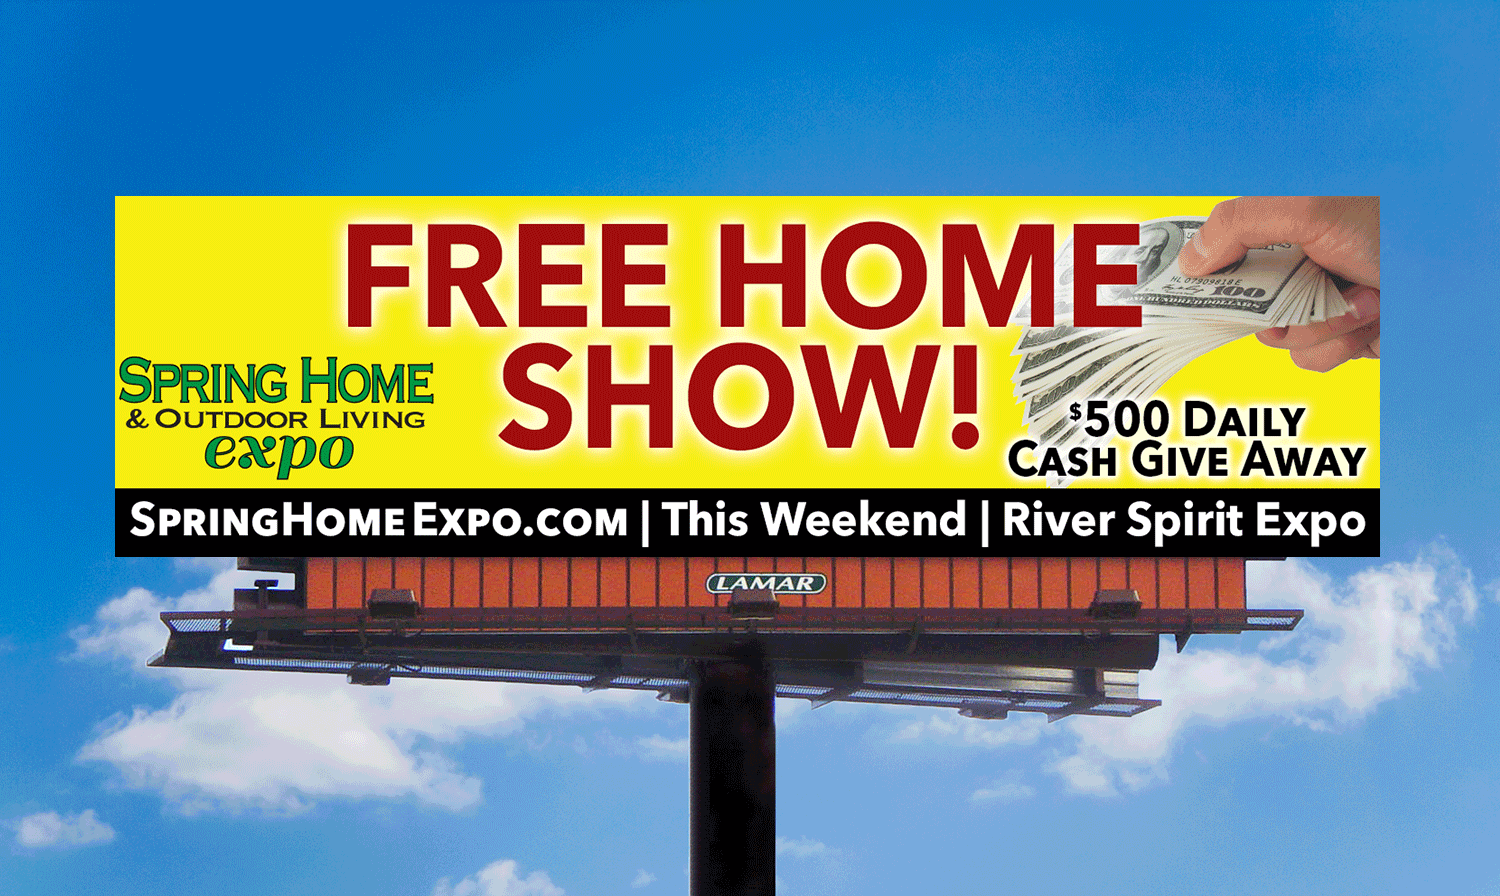 Des Moines Home + Outdoor Living Show Friday, March 10th thru Sunday, March 12th, 2017